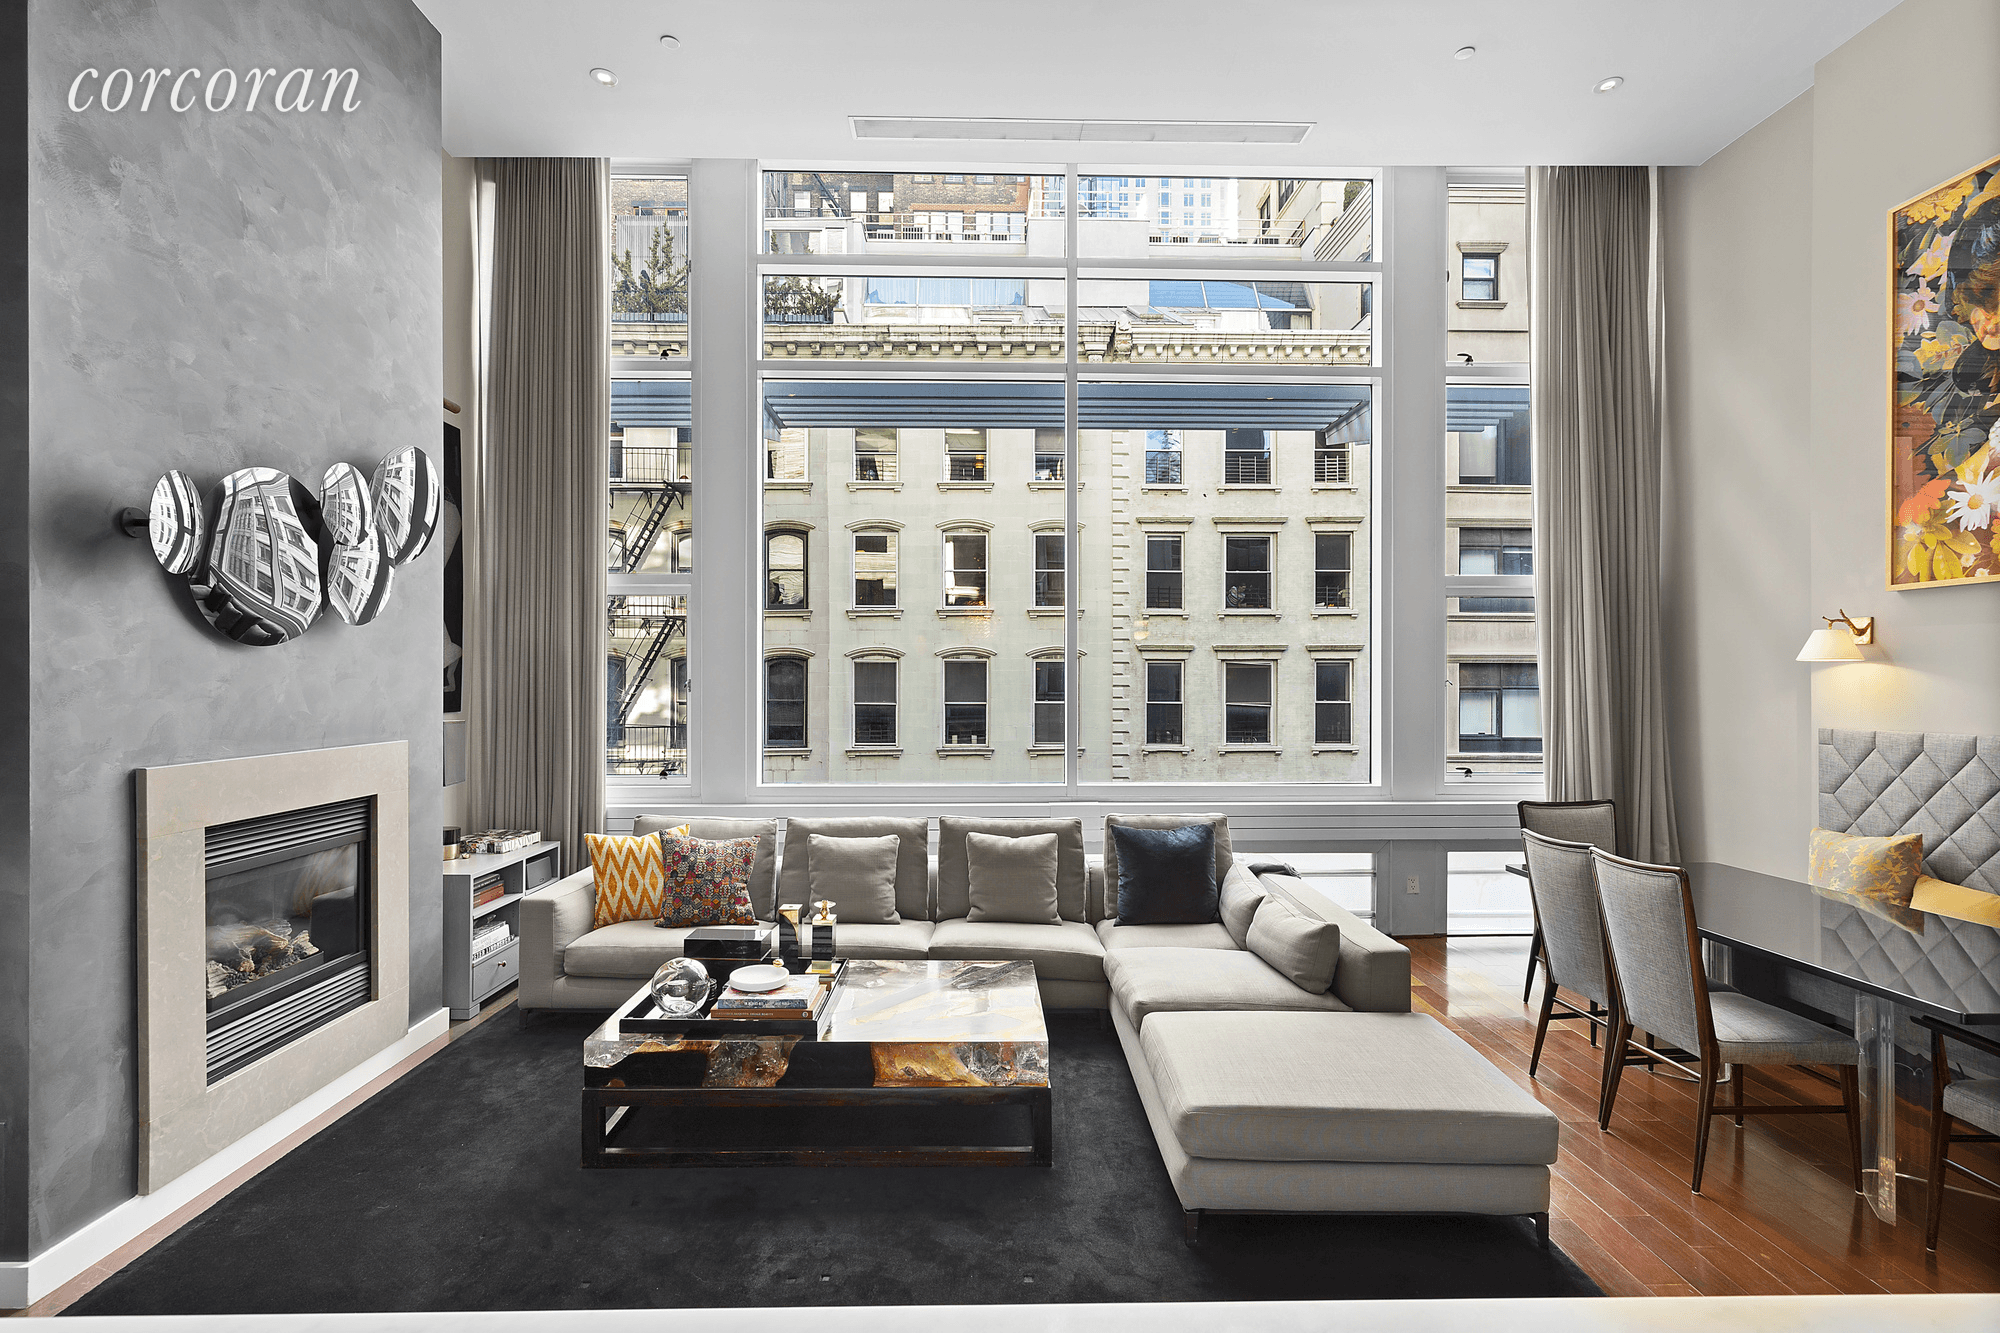 A modern interpretation of Tribeca loft living, this gorgeous, light filled three bedroom, three bathroom duplex offers an expansive floor plan, green design and chic contemporary finishes.